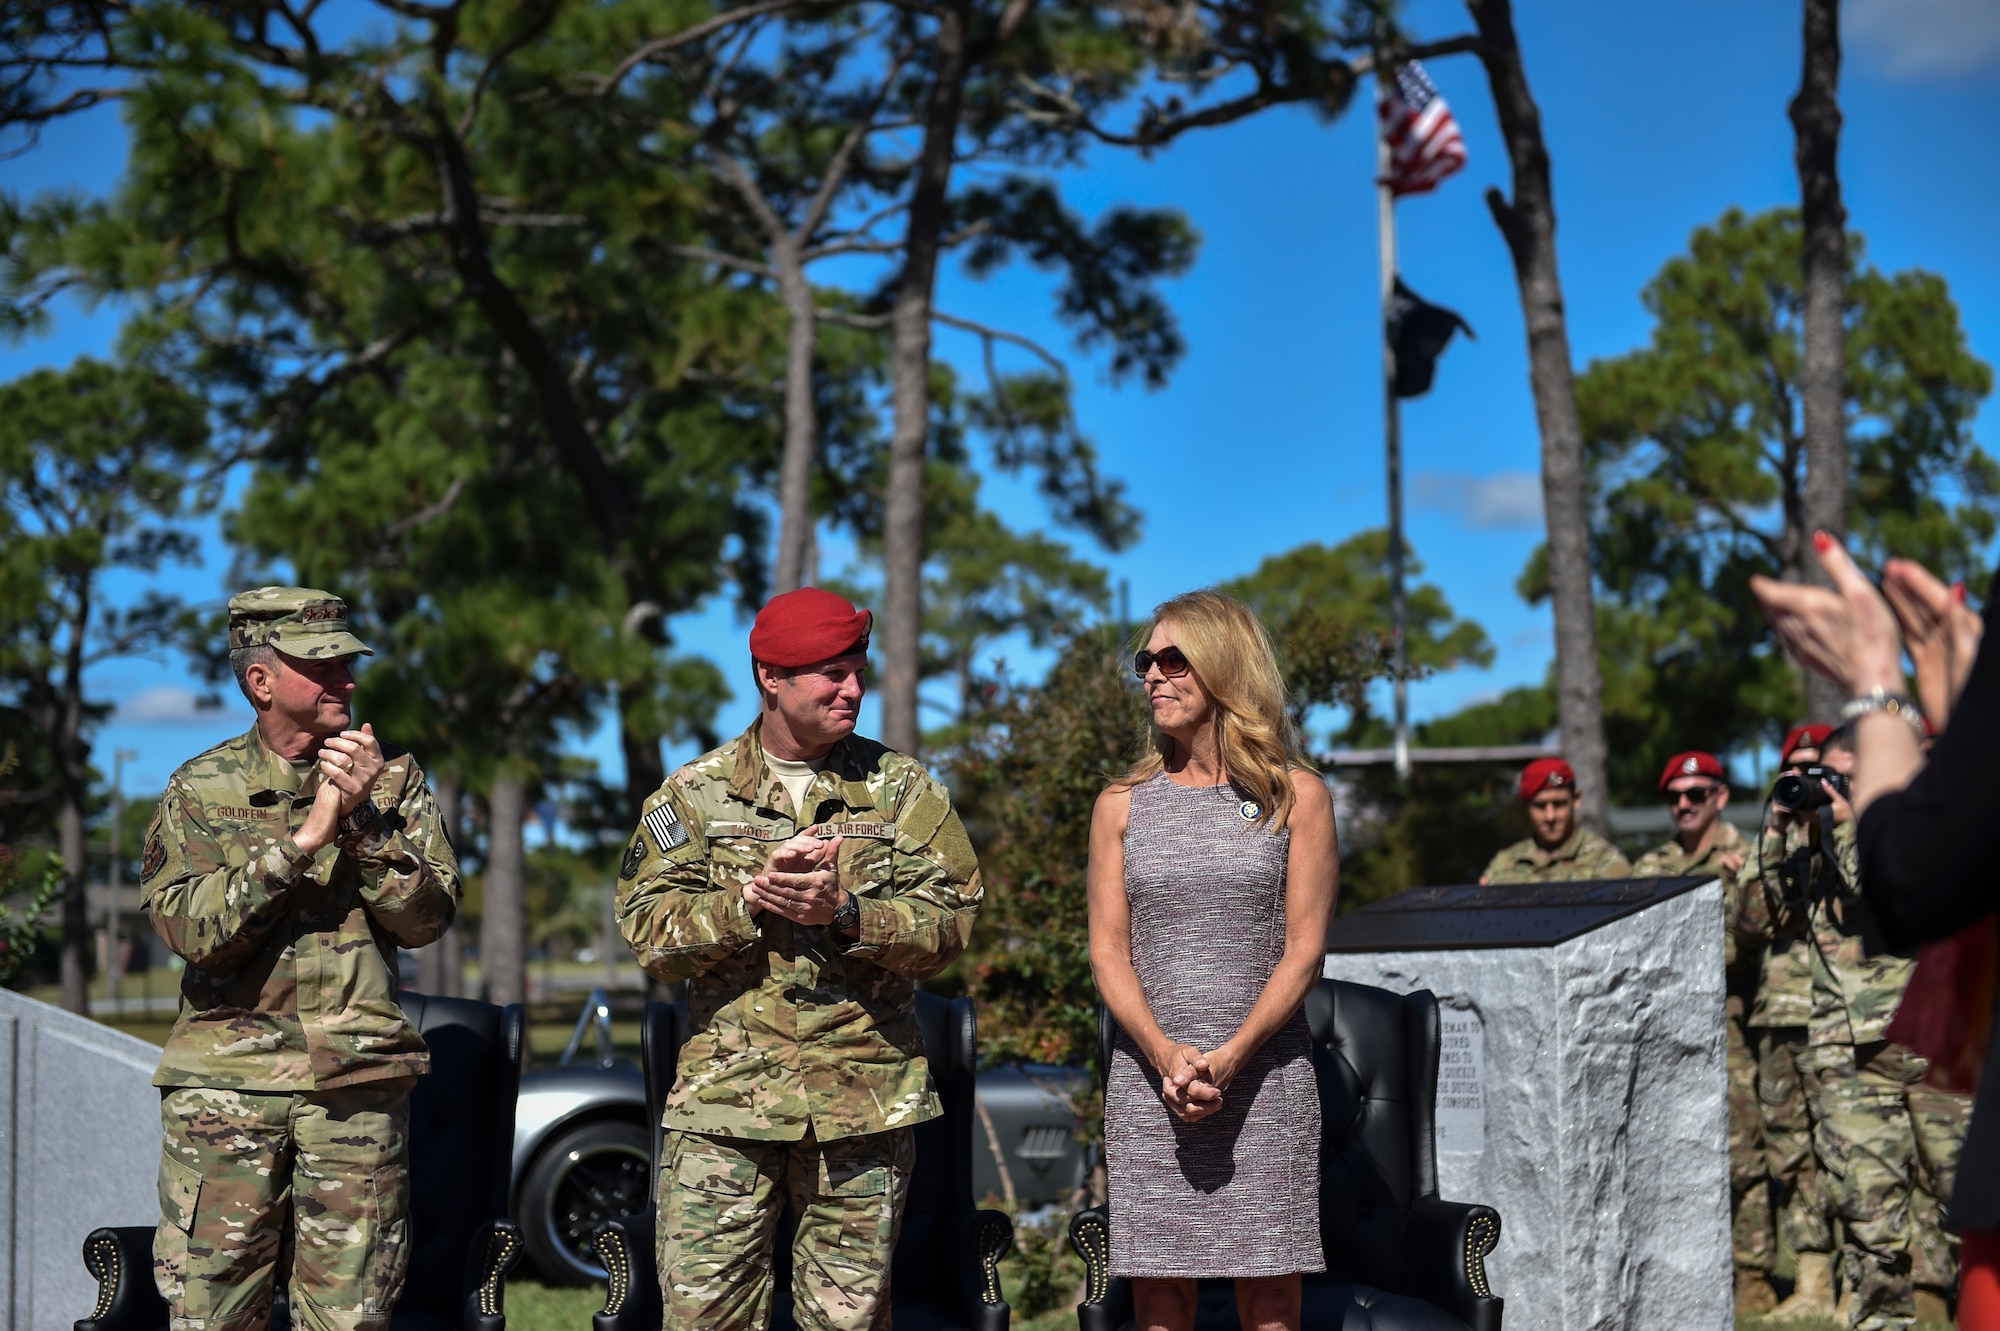 The Chief of Staff of the Air Force, Gen. David Goldfein and U.S. Air Force Col. Claude Tudor, Jr., commander of the 24th Special Operations Wing applaud Valerie Nessel, widow of U.S. Air Force Master Sgt. John Chapman, during a Medal of Honor memorial unveiling ceremony on Oct. 27, 2018, at Hurlburt Field, Florida.